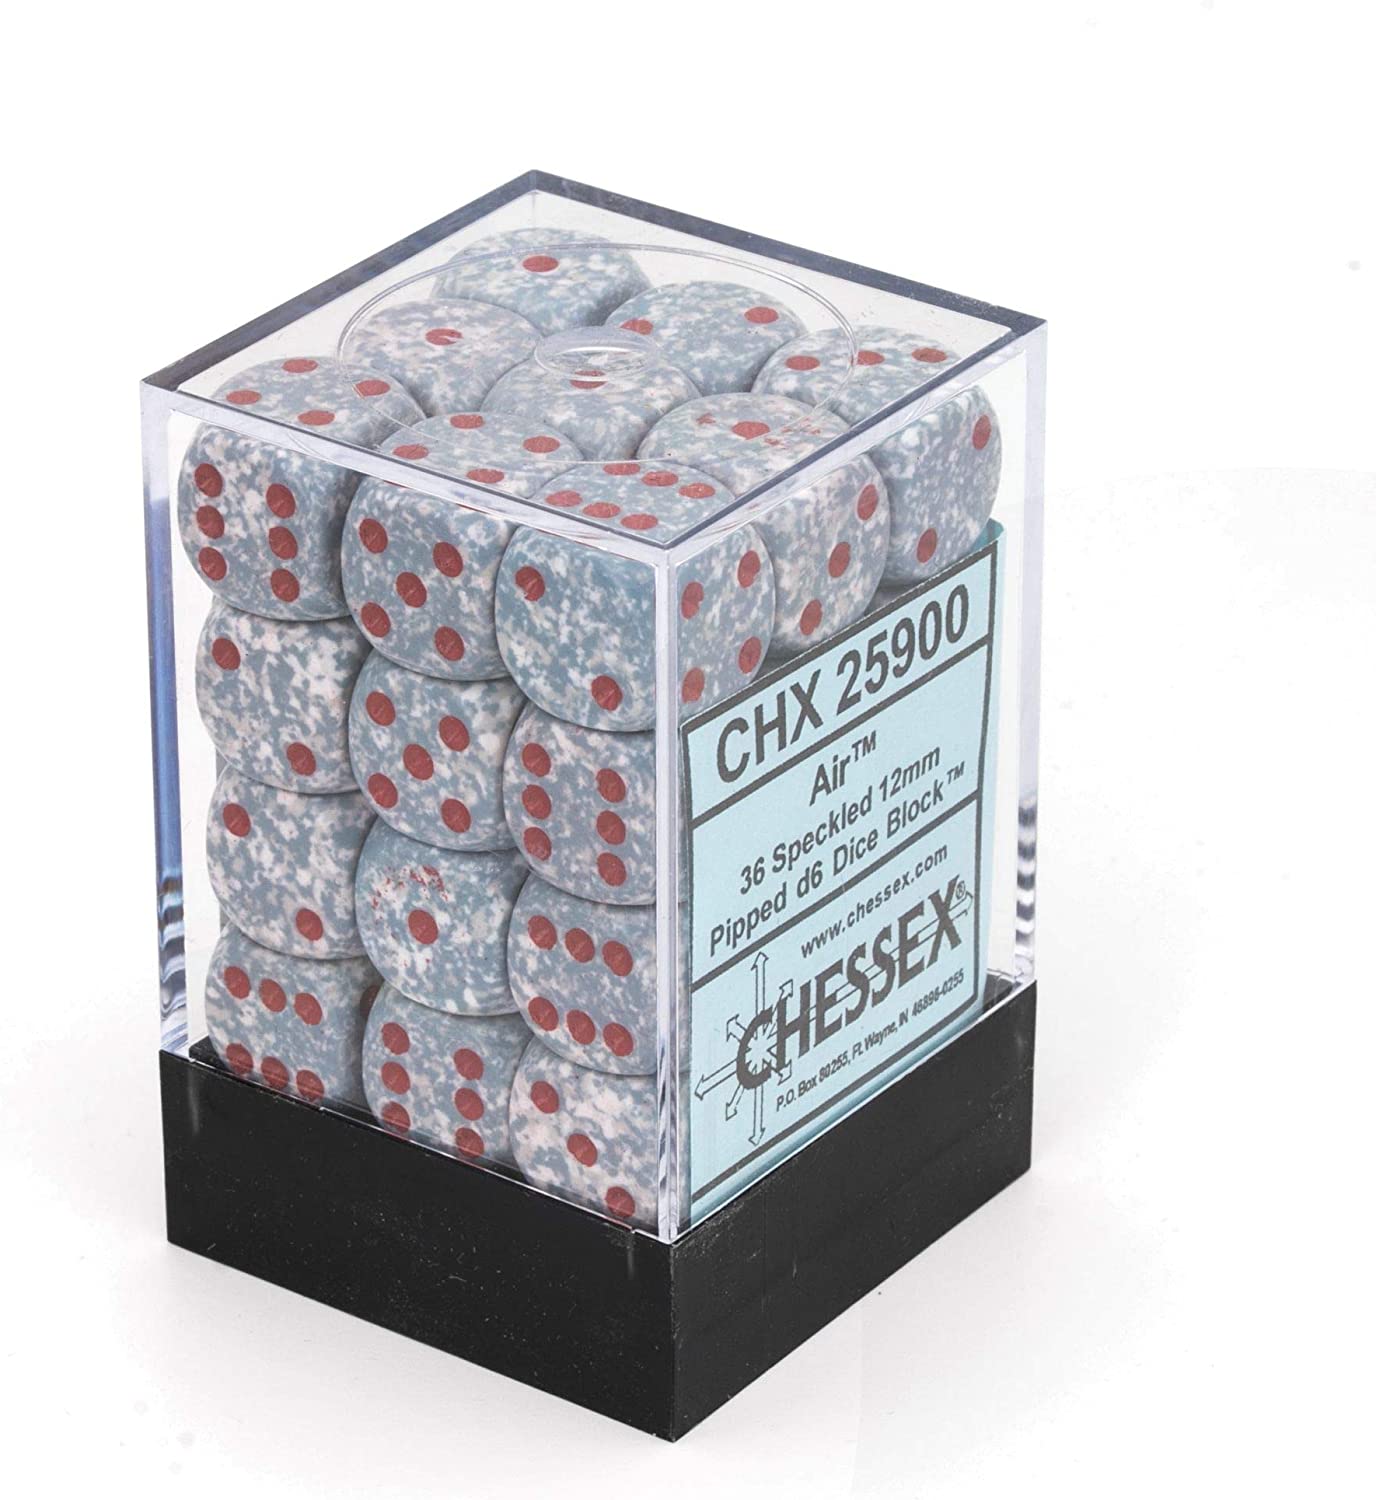 Chessex Dice: D6 Block 12mm - Speckled - Air (CHX 25900) - Gamescape